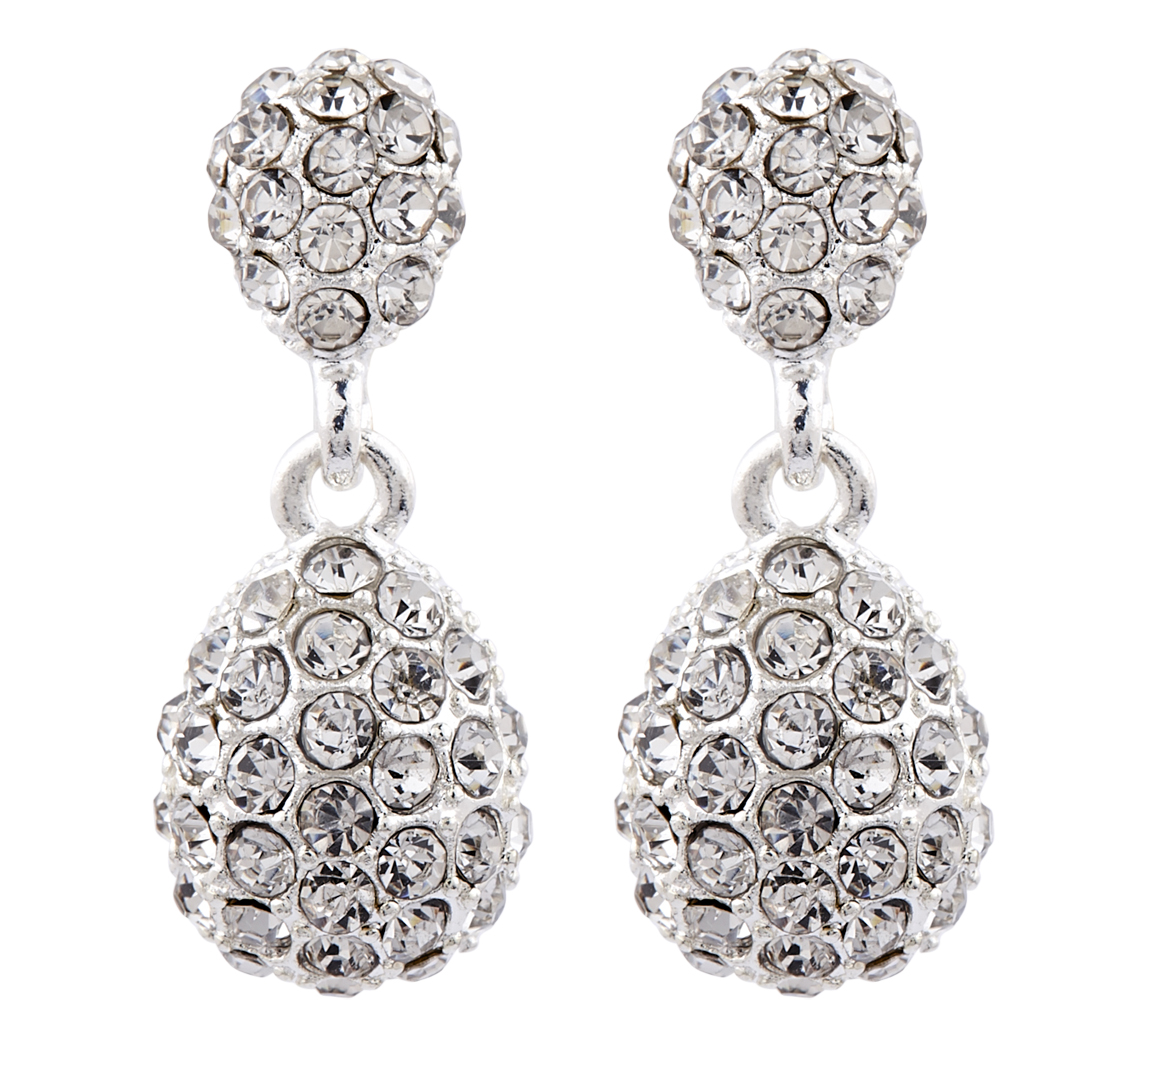 Clip On Earrings - Mia S - silver drop earring with clear crystals